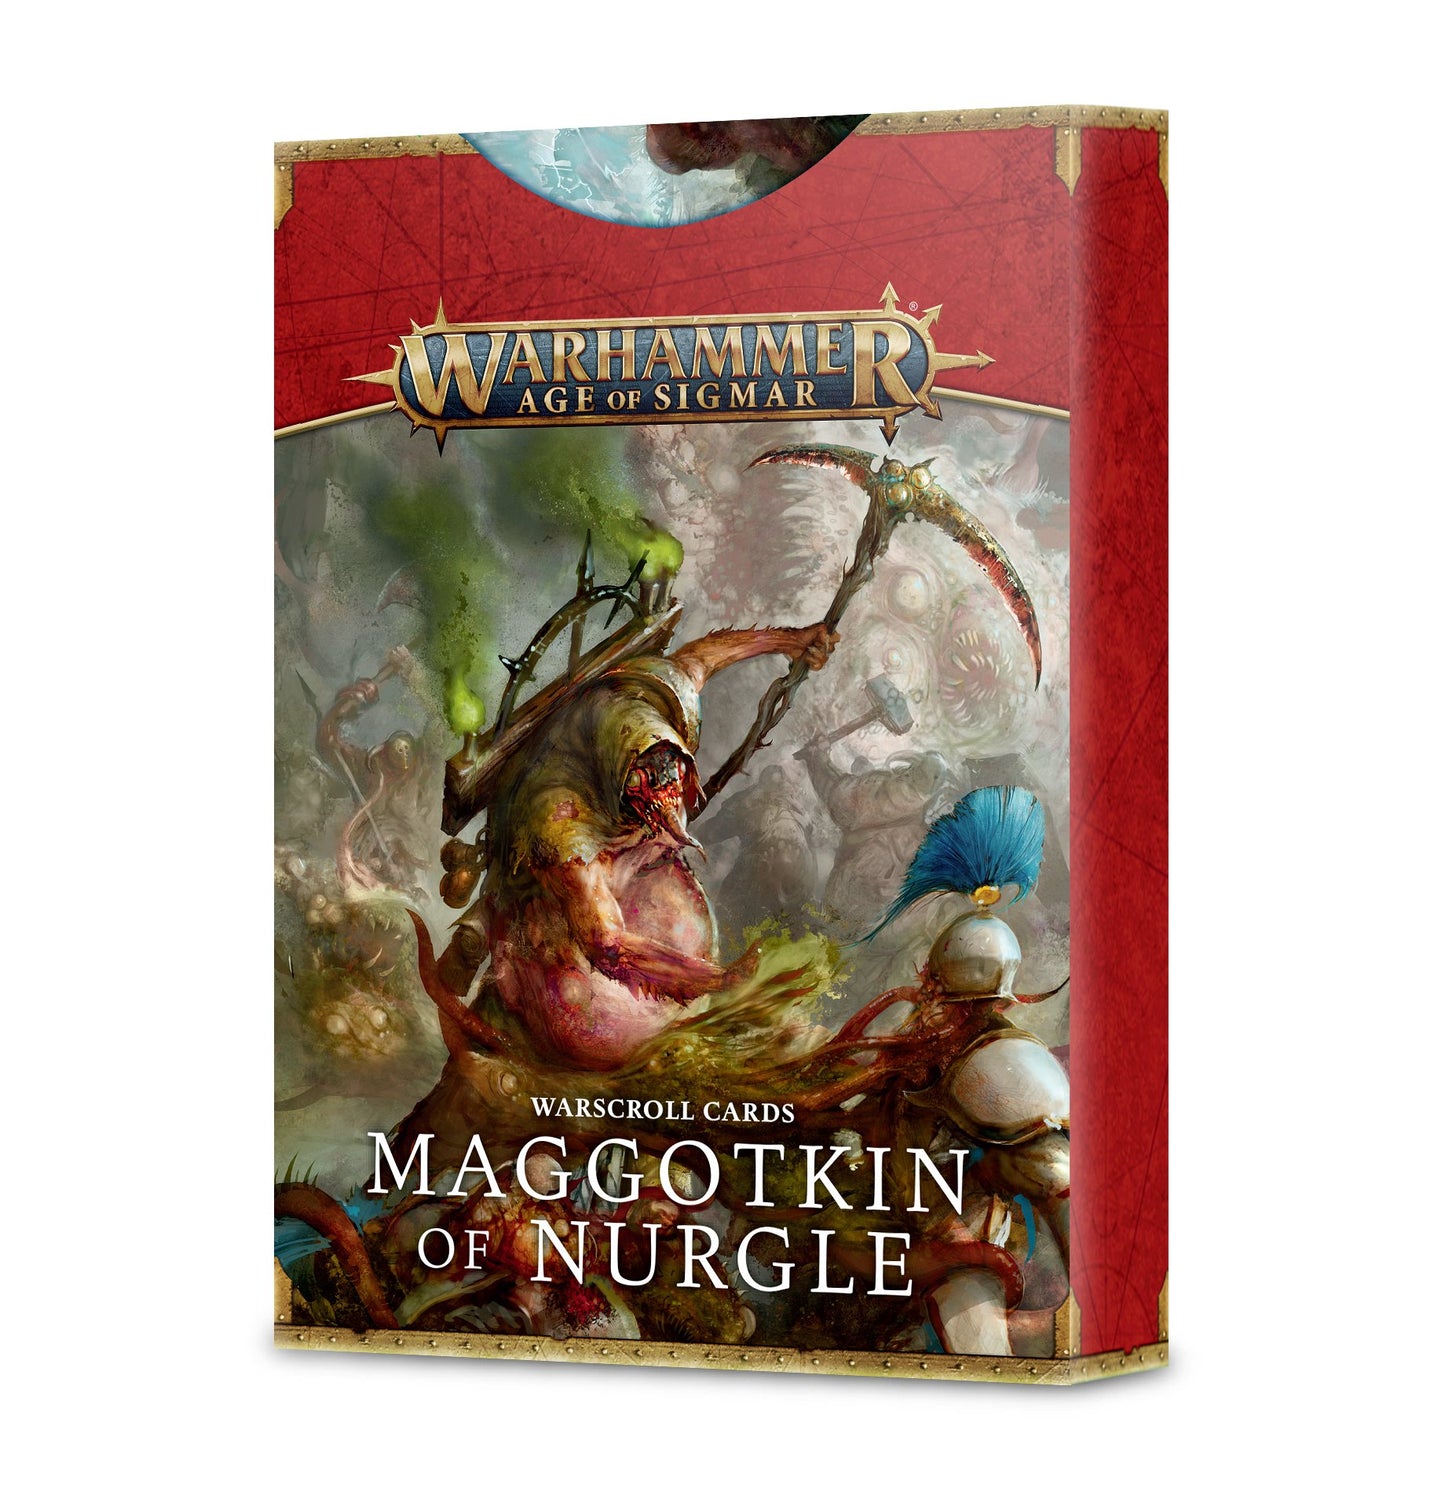 Maggotkin of Nurgle Warscroll Cards - (Last chance to Buy)